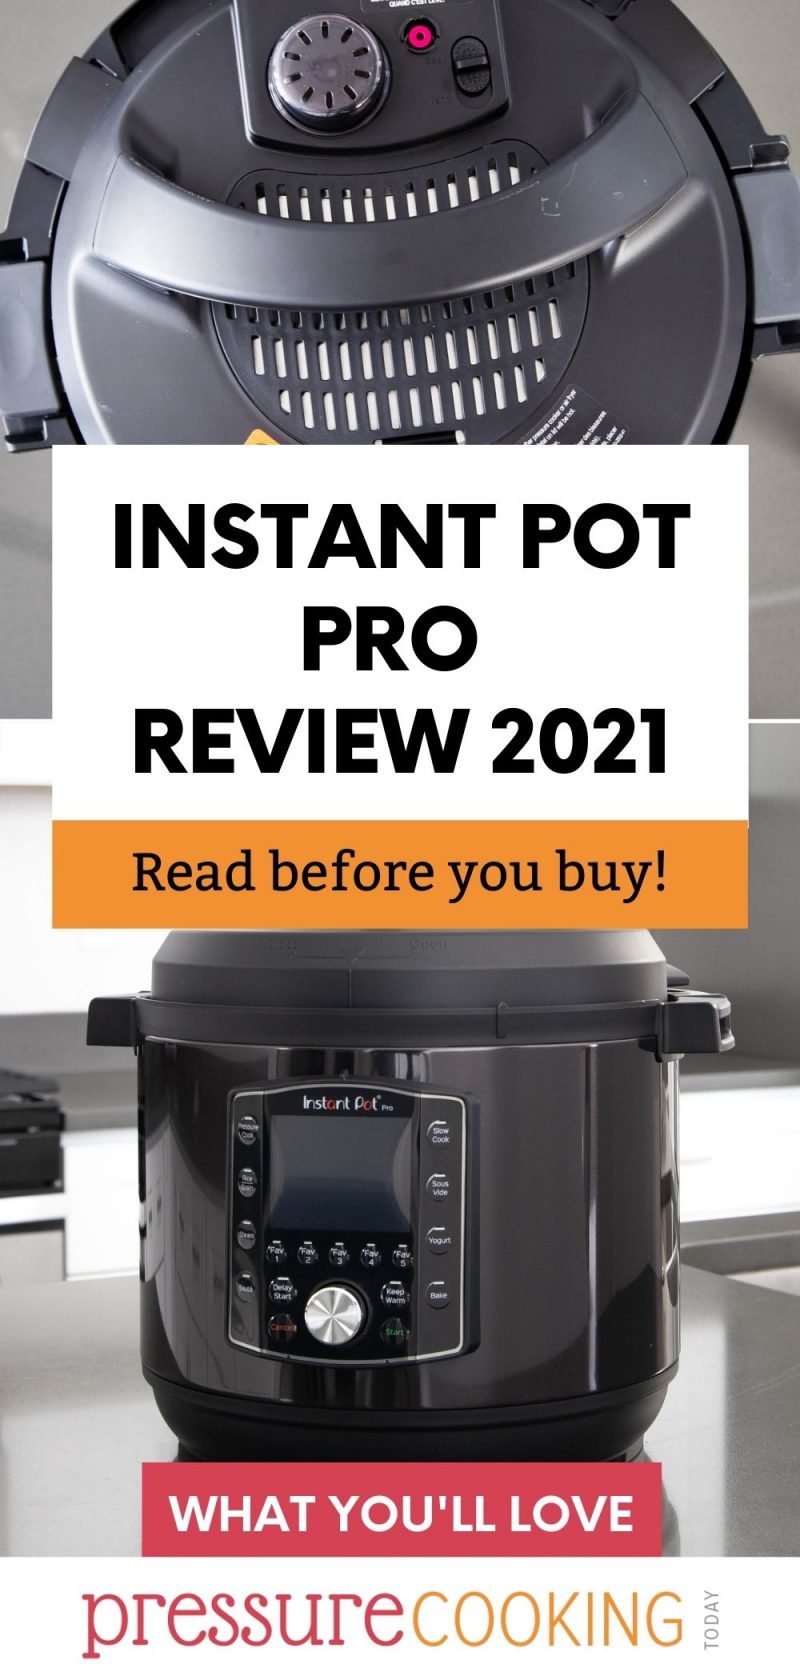 Pinterest image promoting Instant Pot Pro 2021, with a close-up of the lid and a 